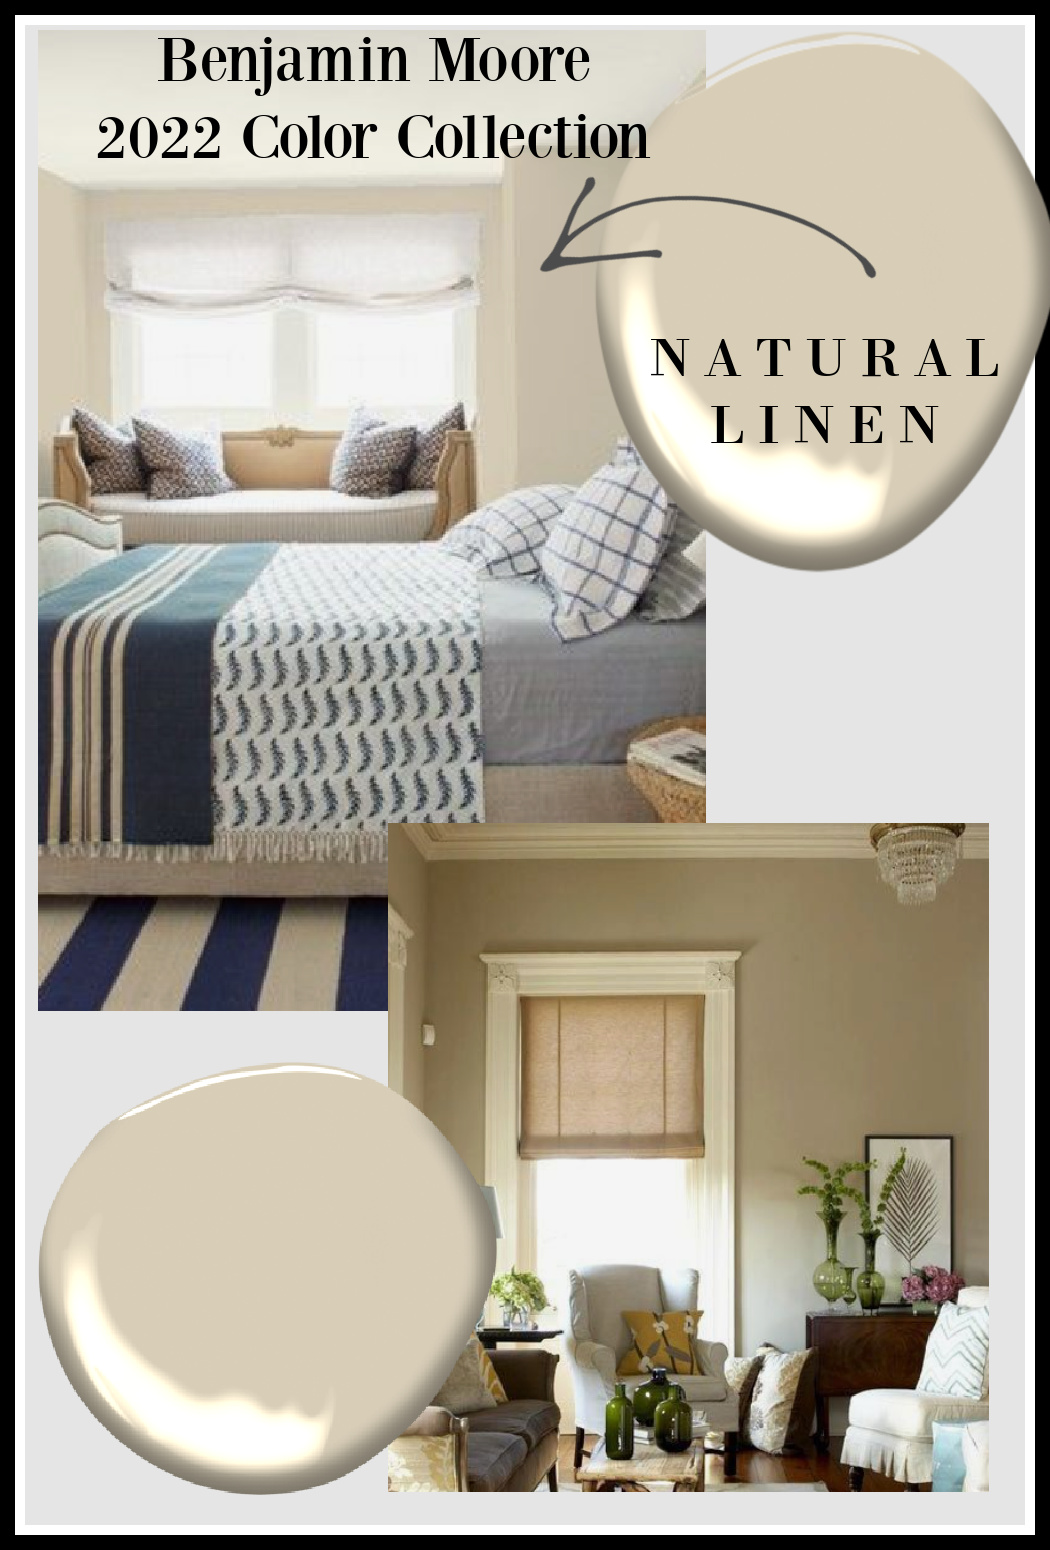 Benjamin Moore Natural Linen 966 paint color (from the 2022 color collection) - Hello Lovely. #naturallinen #paintcolors